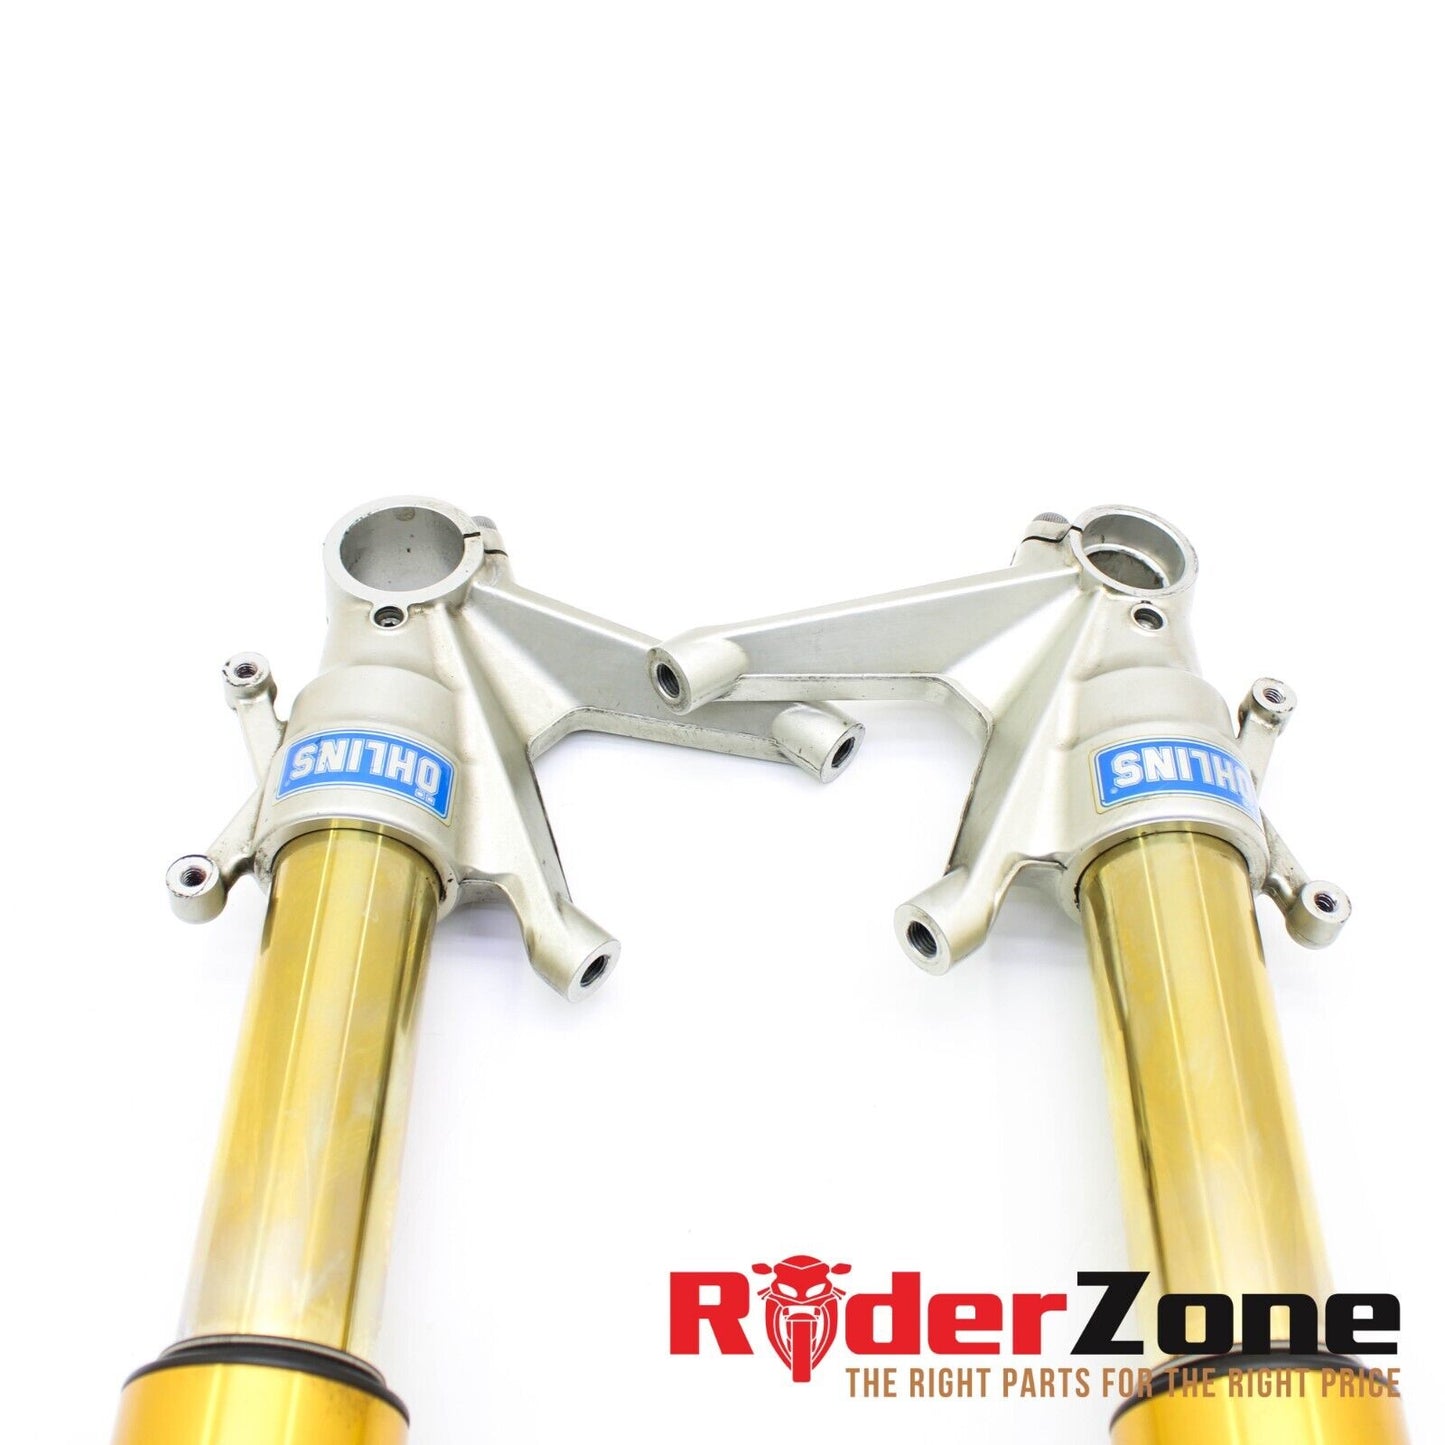 2009 - 2012 DUCATI STREETFIGHTER S FORKS FRONT SUSPENSION OHLINS TRIPLE TREE